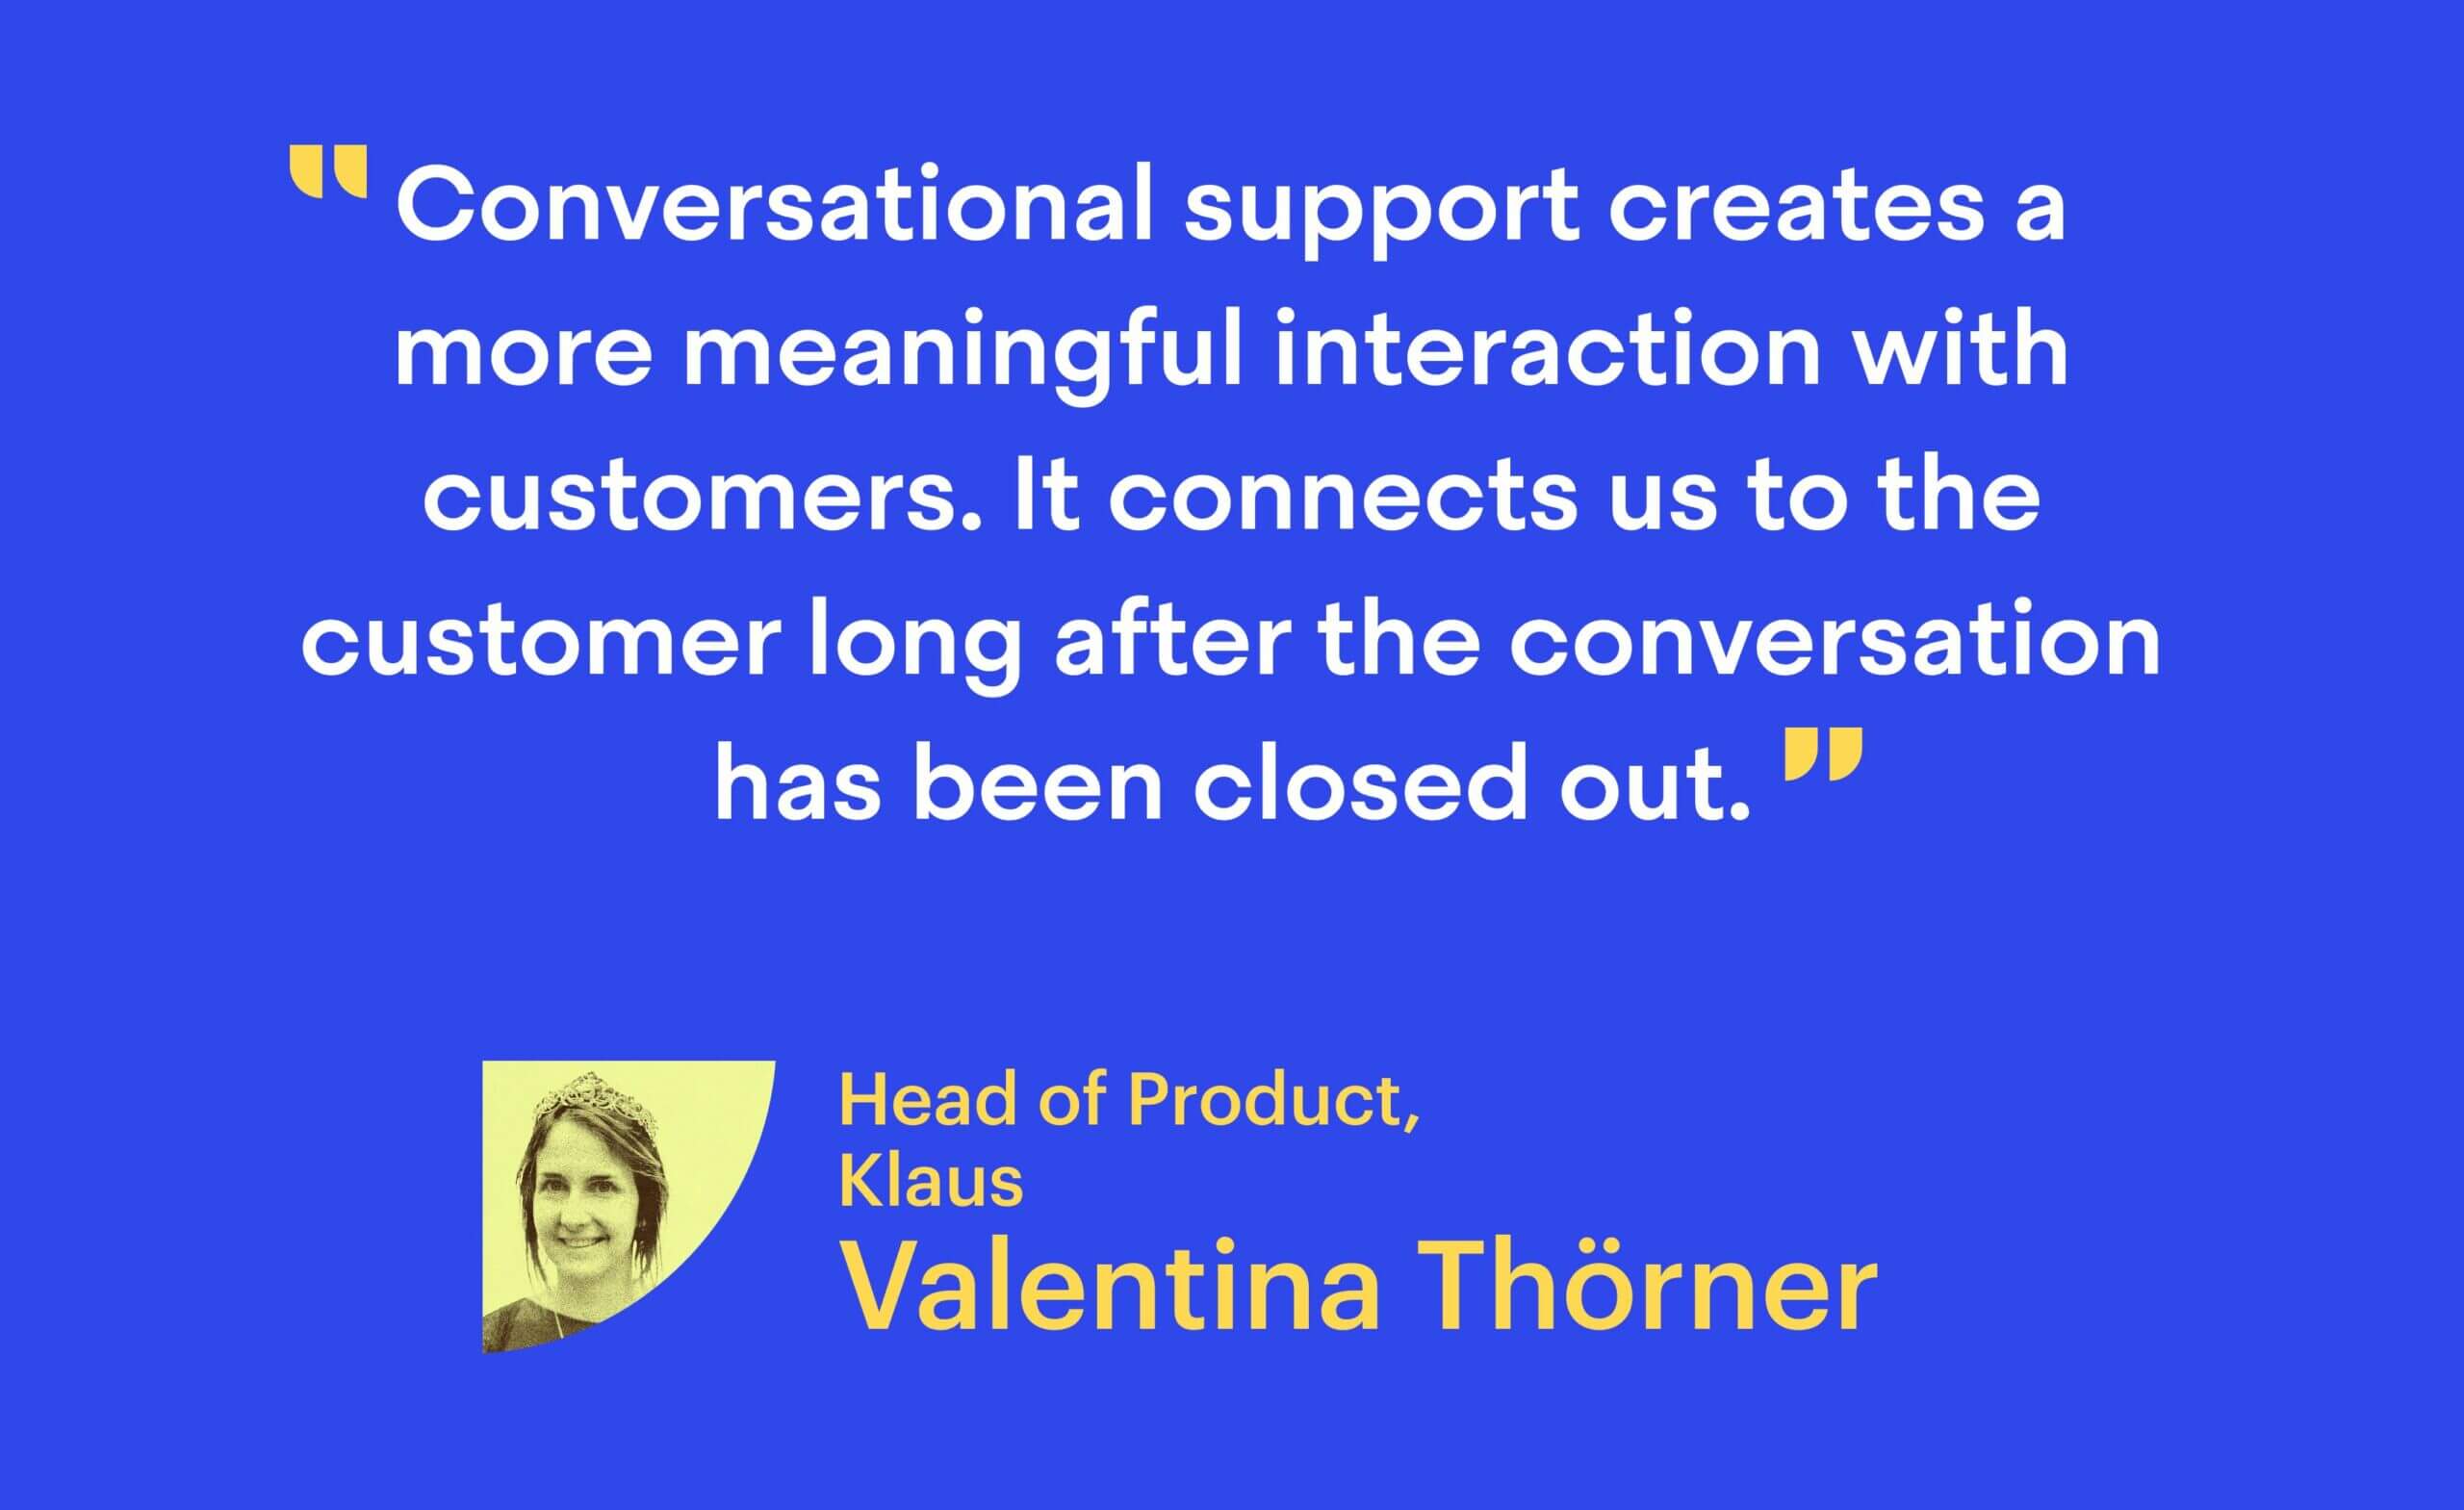 “Conversational support creates a more meaningful interaction with customers. It connects us to the customer long after the conversation has been closed out.” Valentina Thörner, Head of Product at Klaus